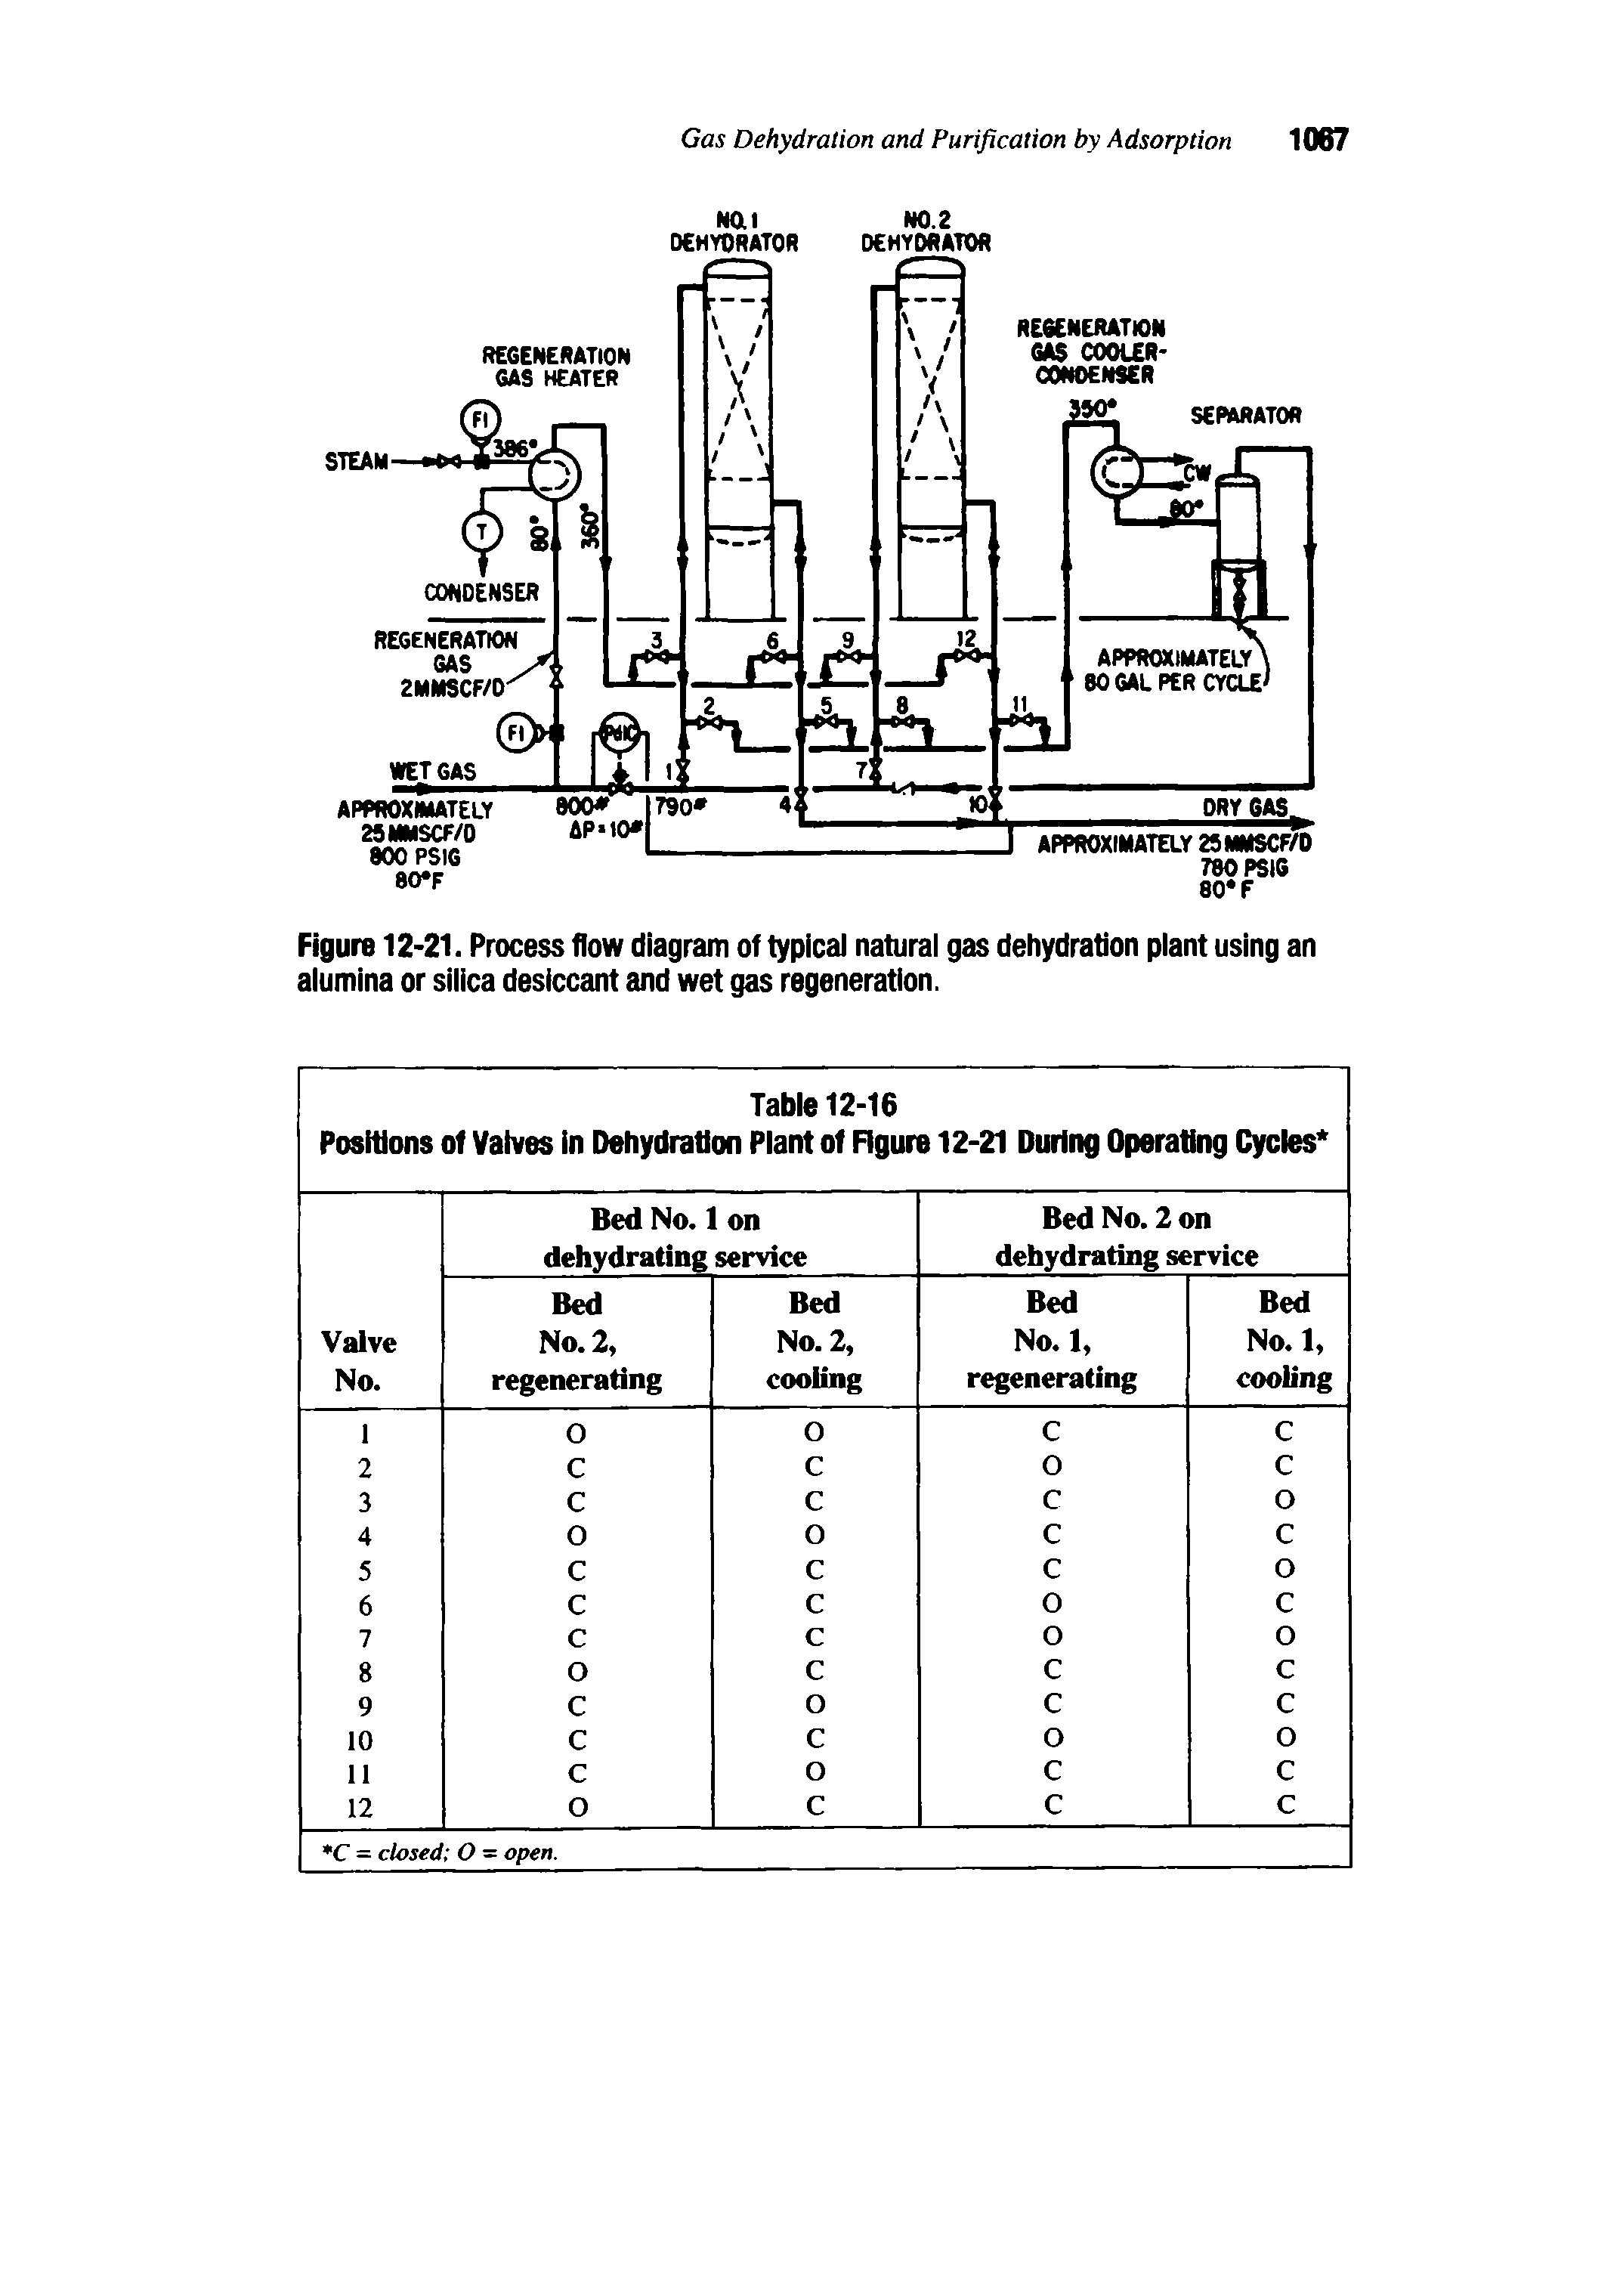 Figure 12-21. Process flow diagram of typical natural gas dehydration plant using an alumina or silica desiccant and wet gas regeneration.